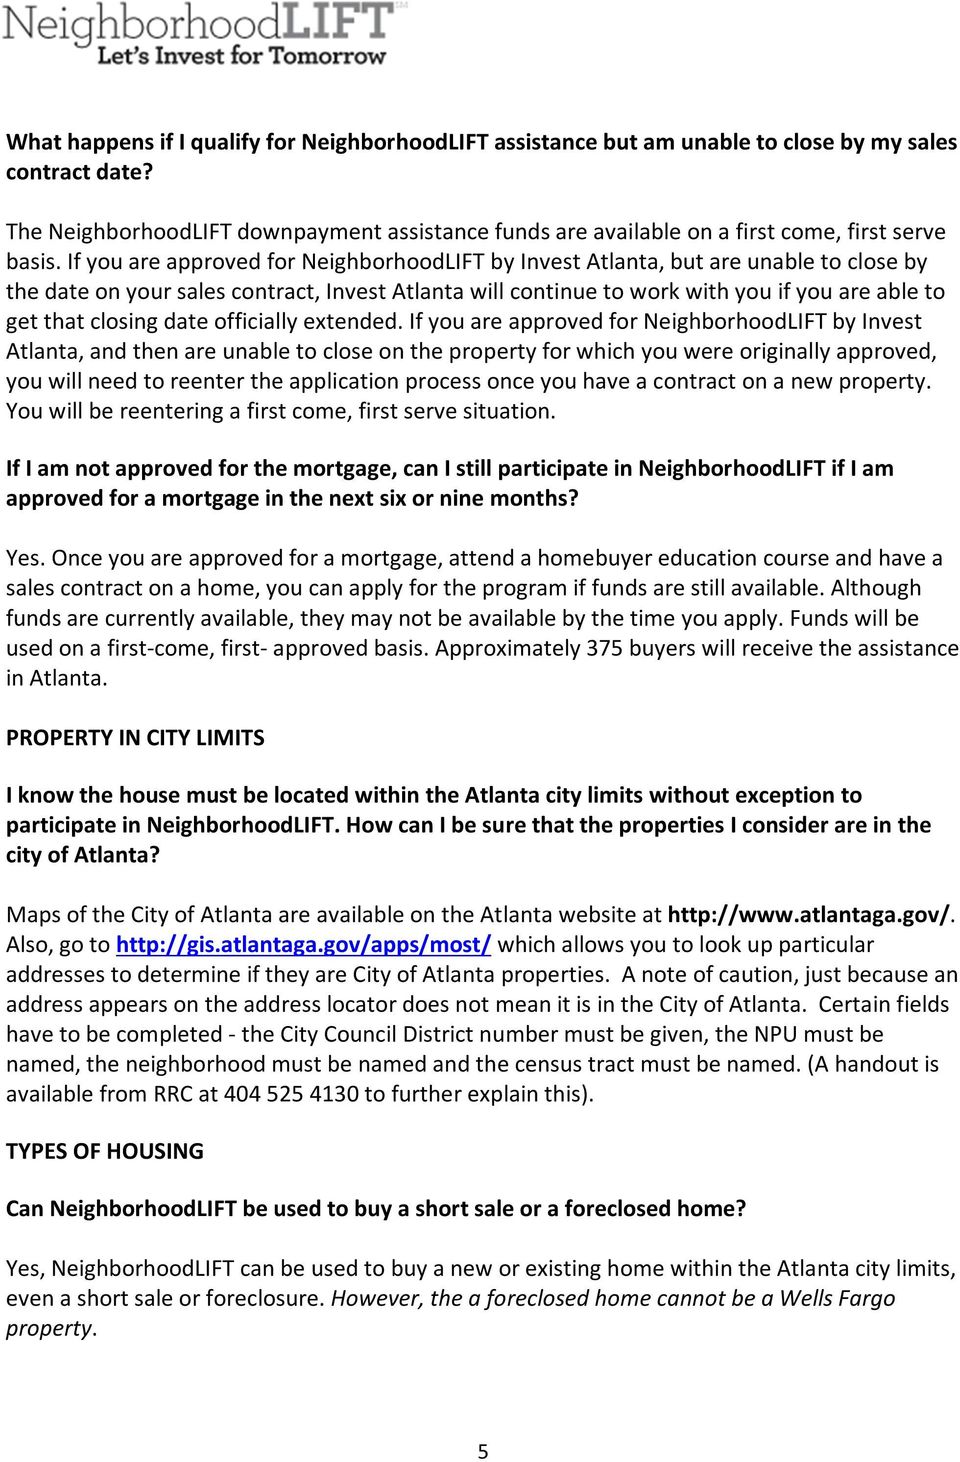 If you are approved for NeighborhoodLIFT by Invest Atlanta, but are unable to close by the date on your sales contract, Invest Atlanta will continue to work with you if you are able to get that